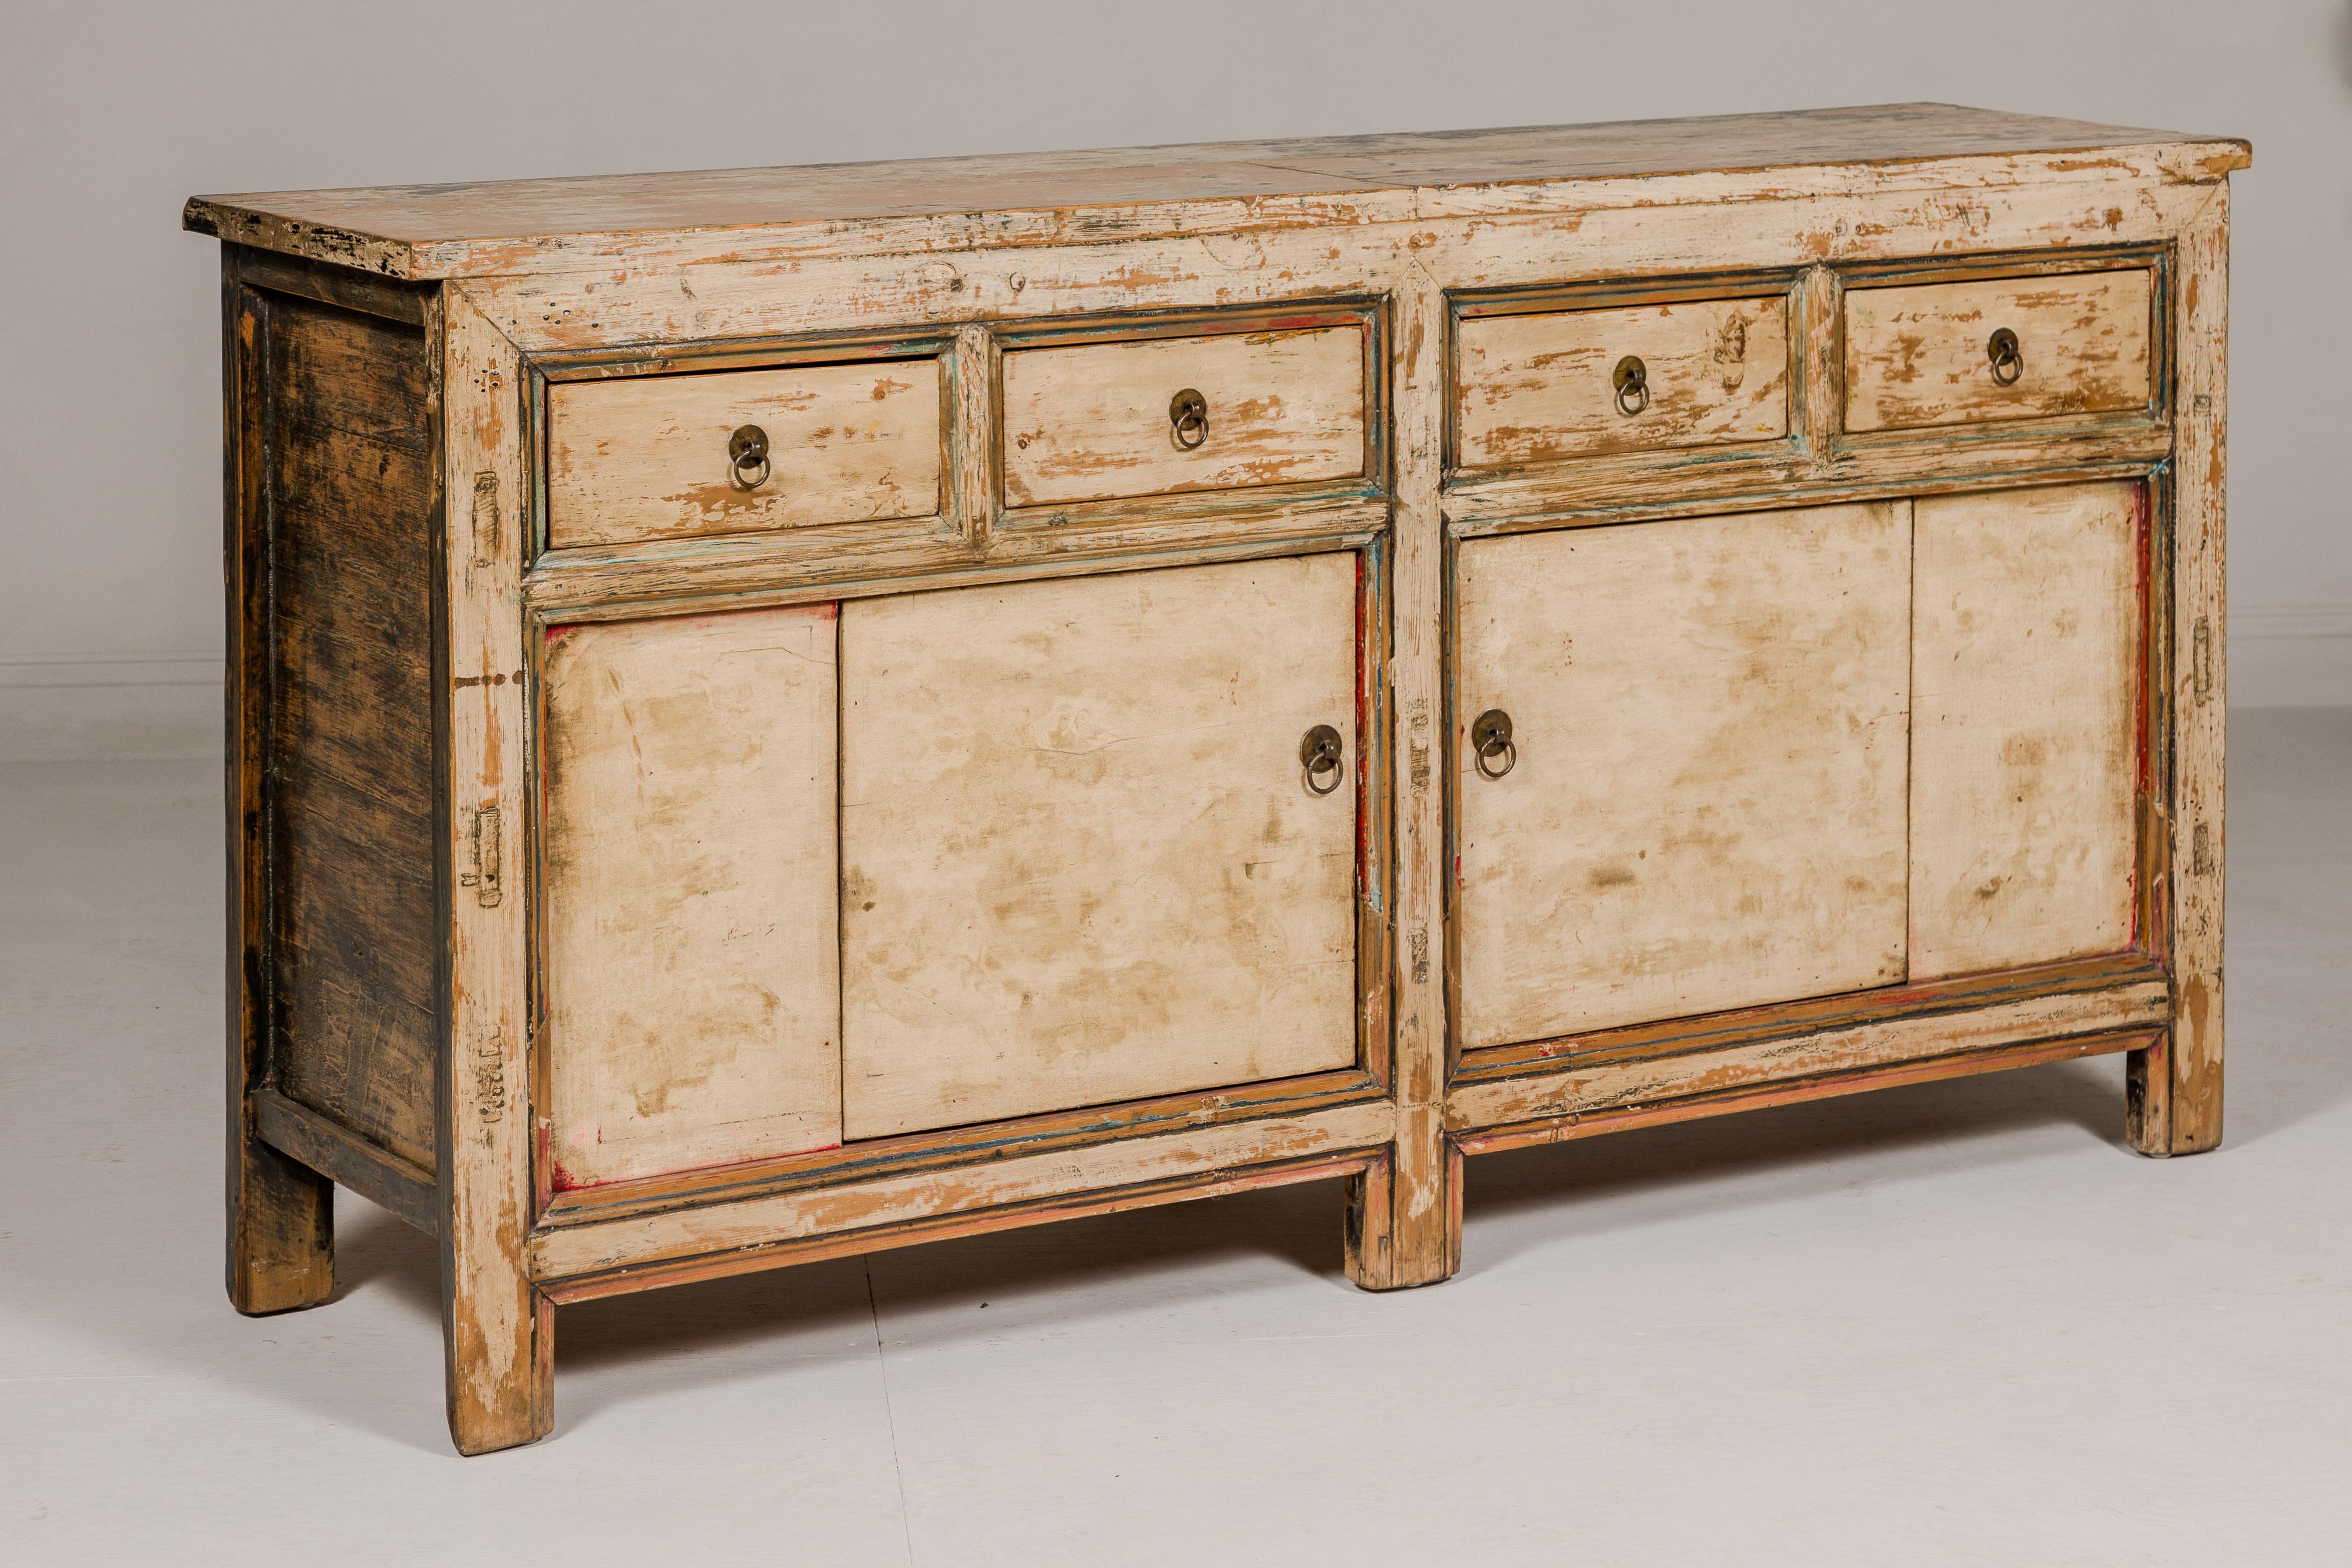 Painted Elm Rustic Sideboard with Two Doors, Four Drawers and Distressed Finish For Sale 6